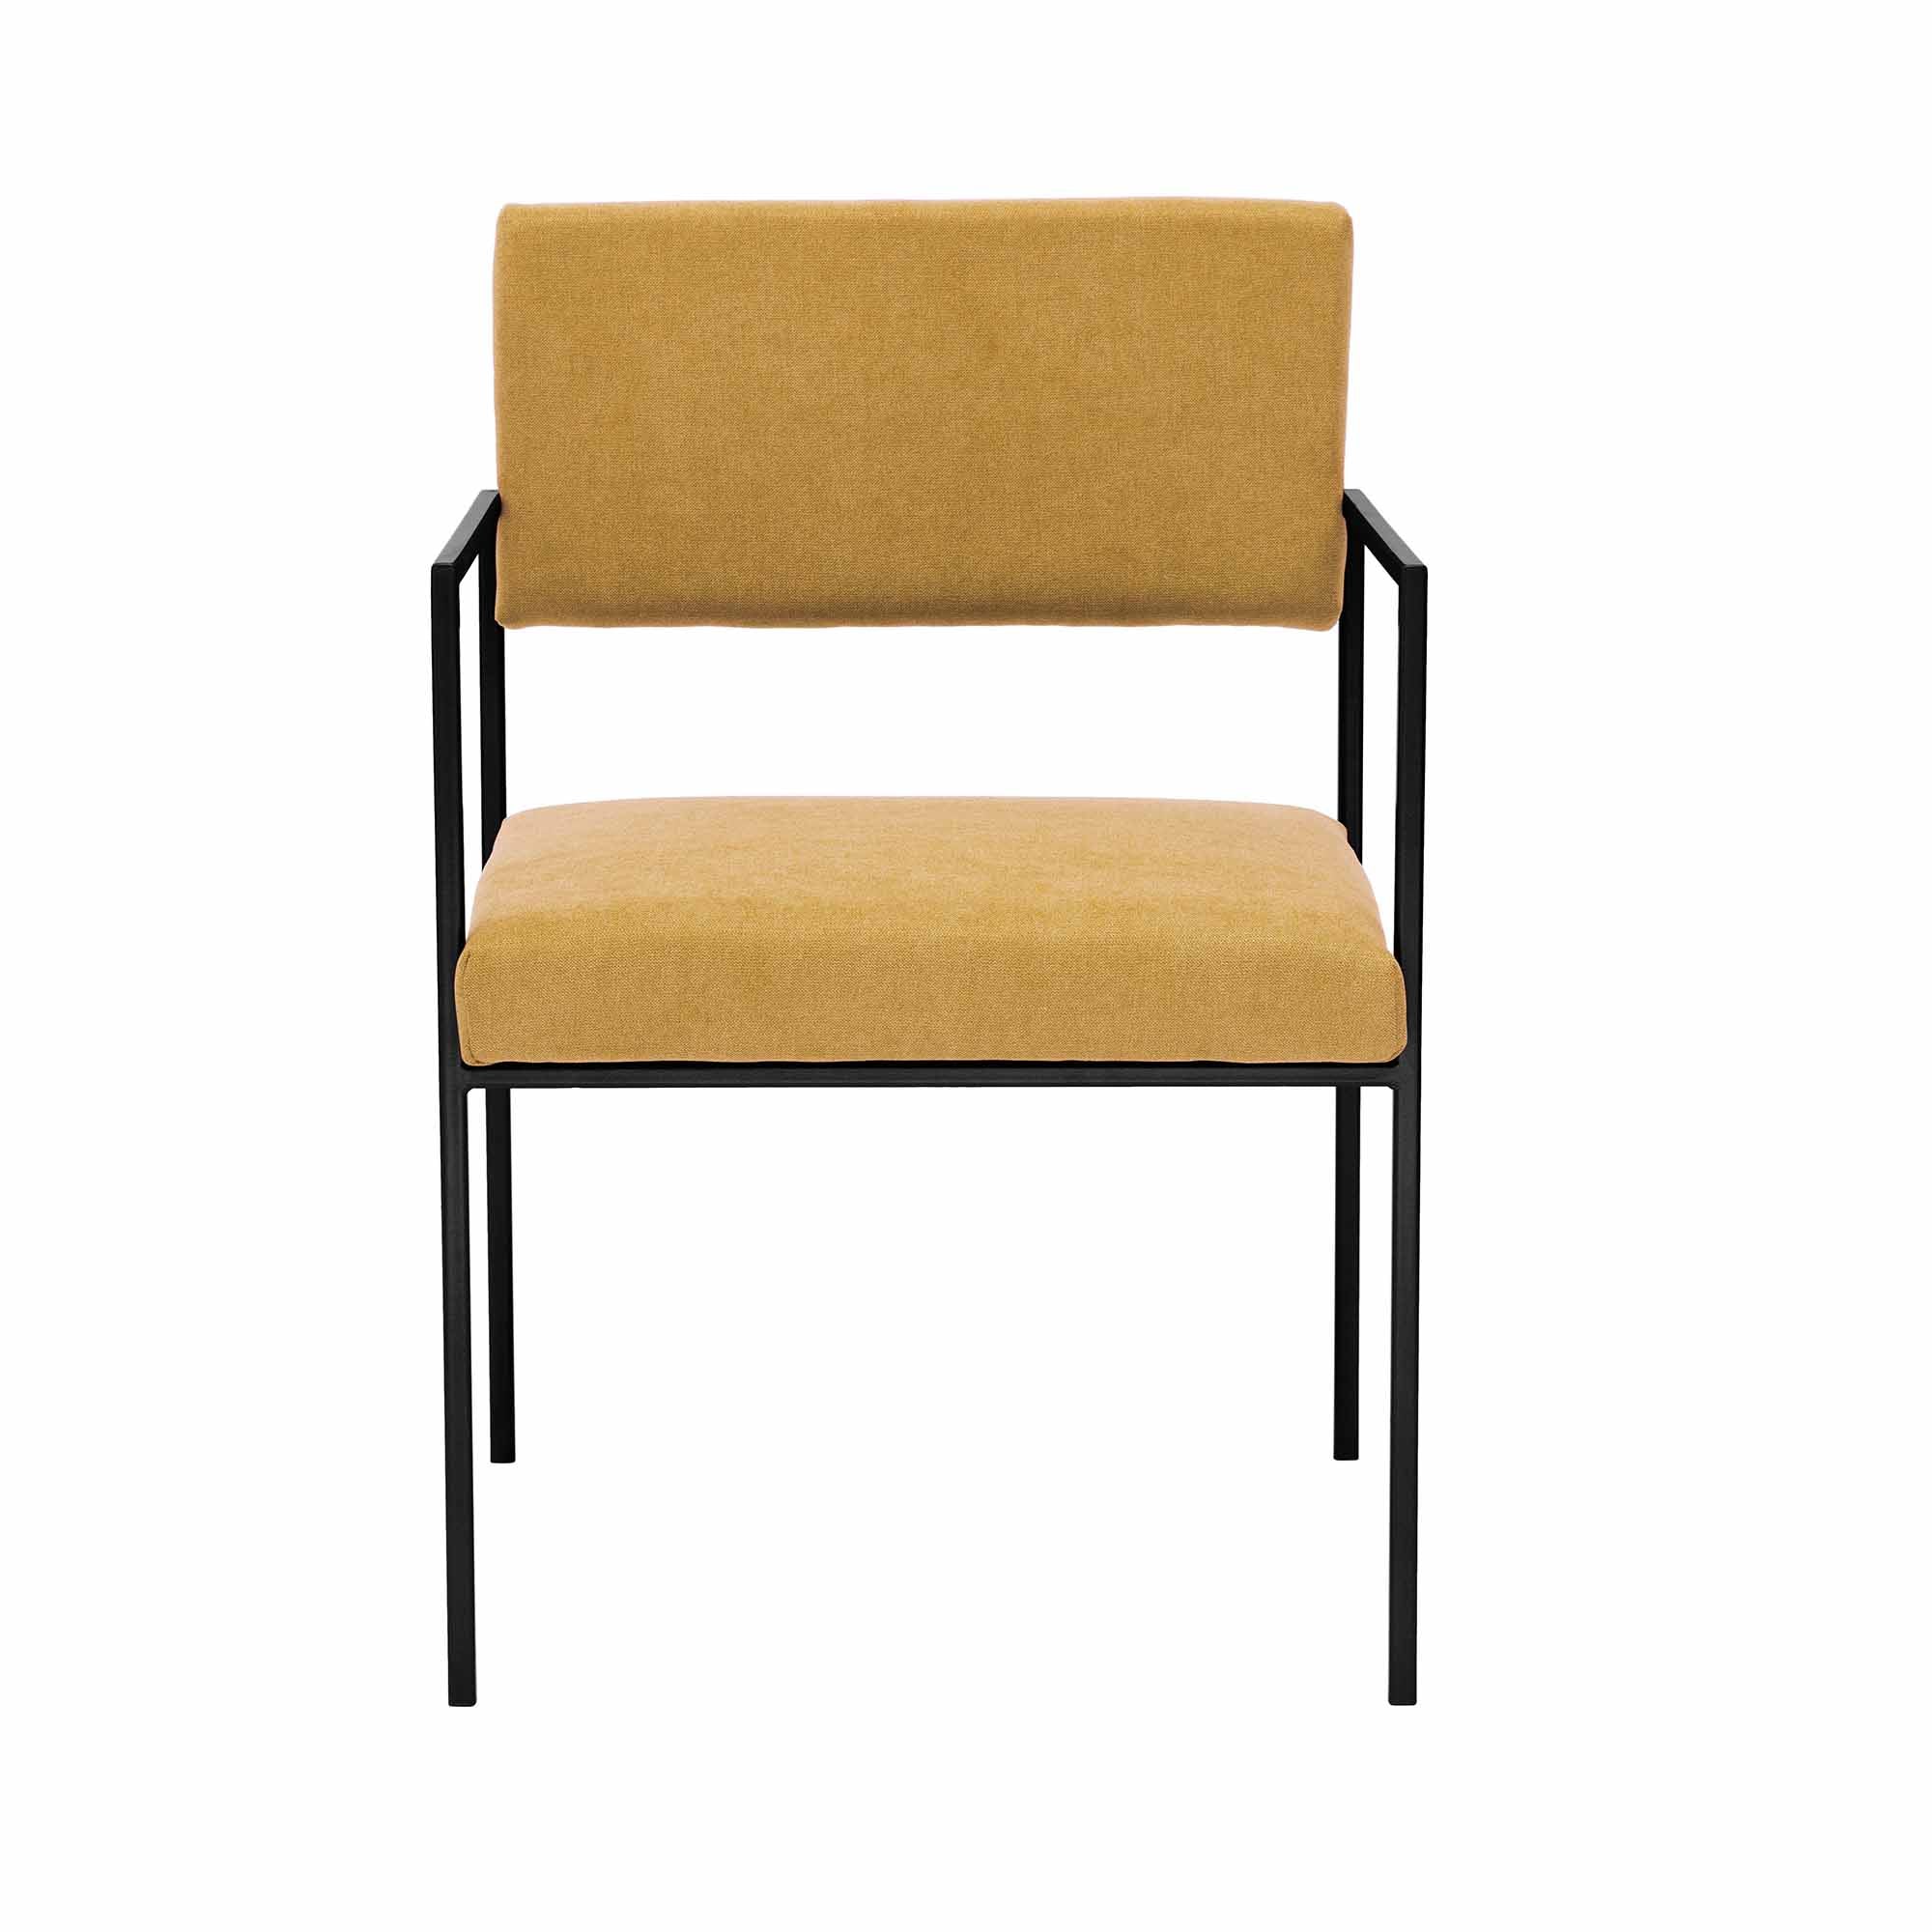 CUBE Armchair, Powder-Coated Steel Frame front view yellow fabric, black frame